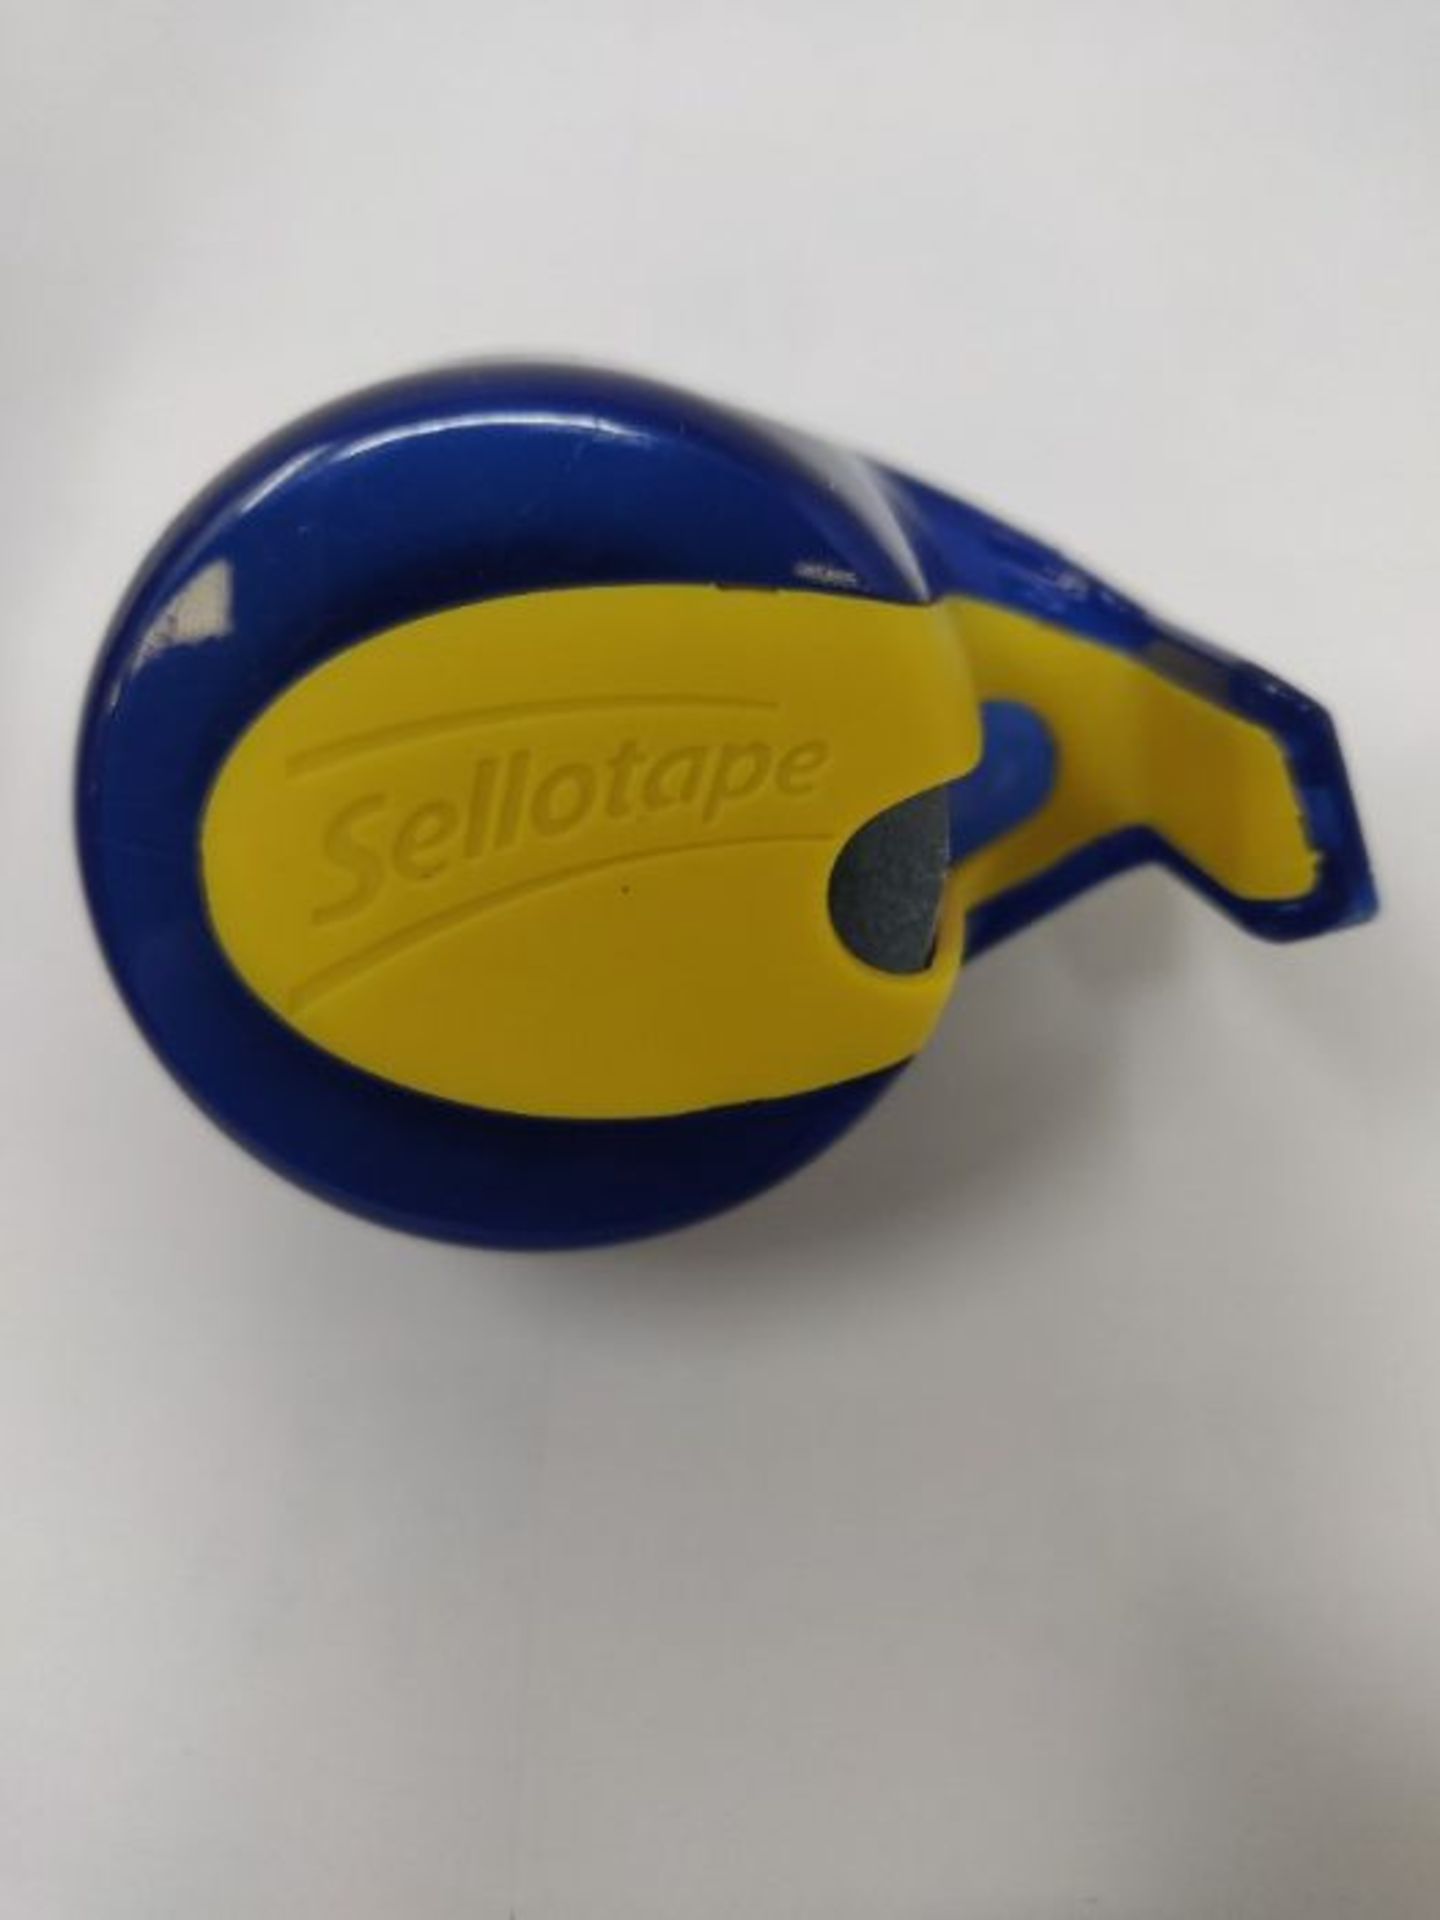 Sellotape On-Hand Dispenser for sticky tape / Both hands free for crafting and wrappin - Image 2 of 2